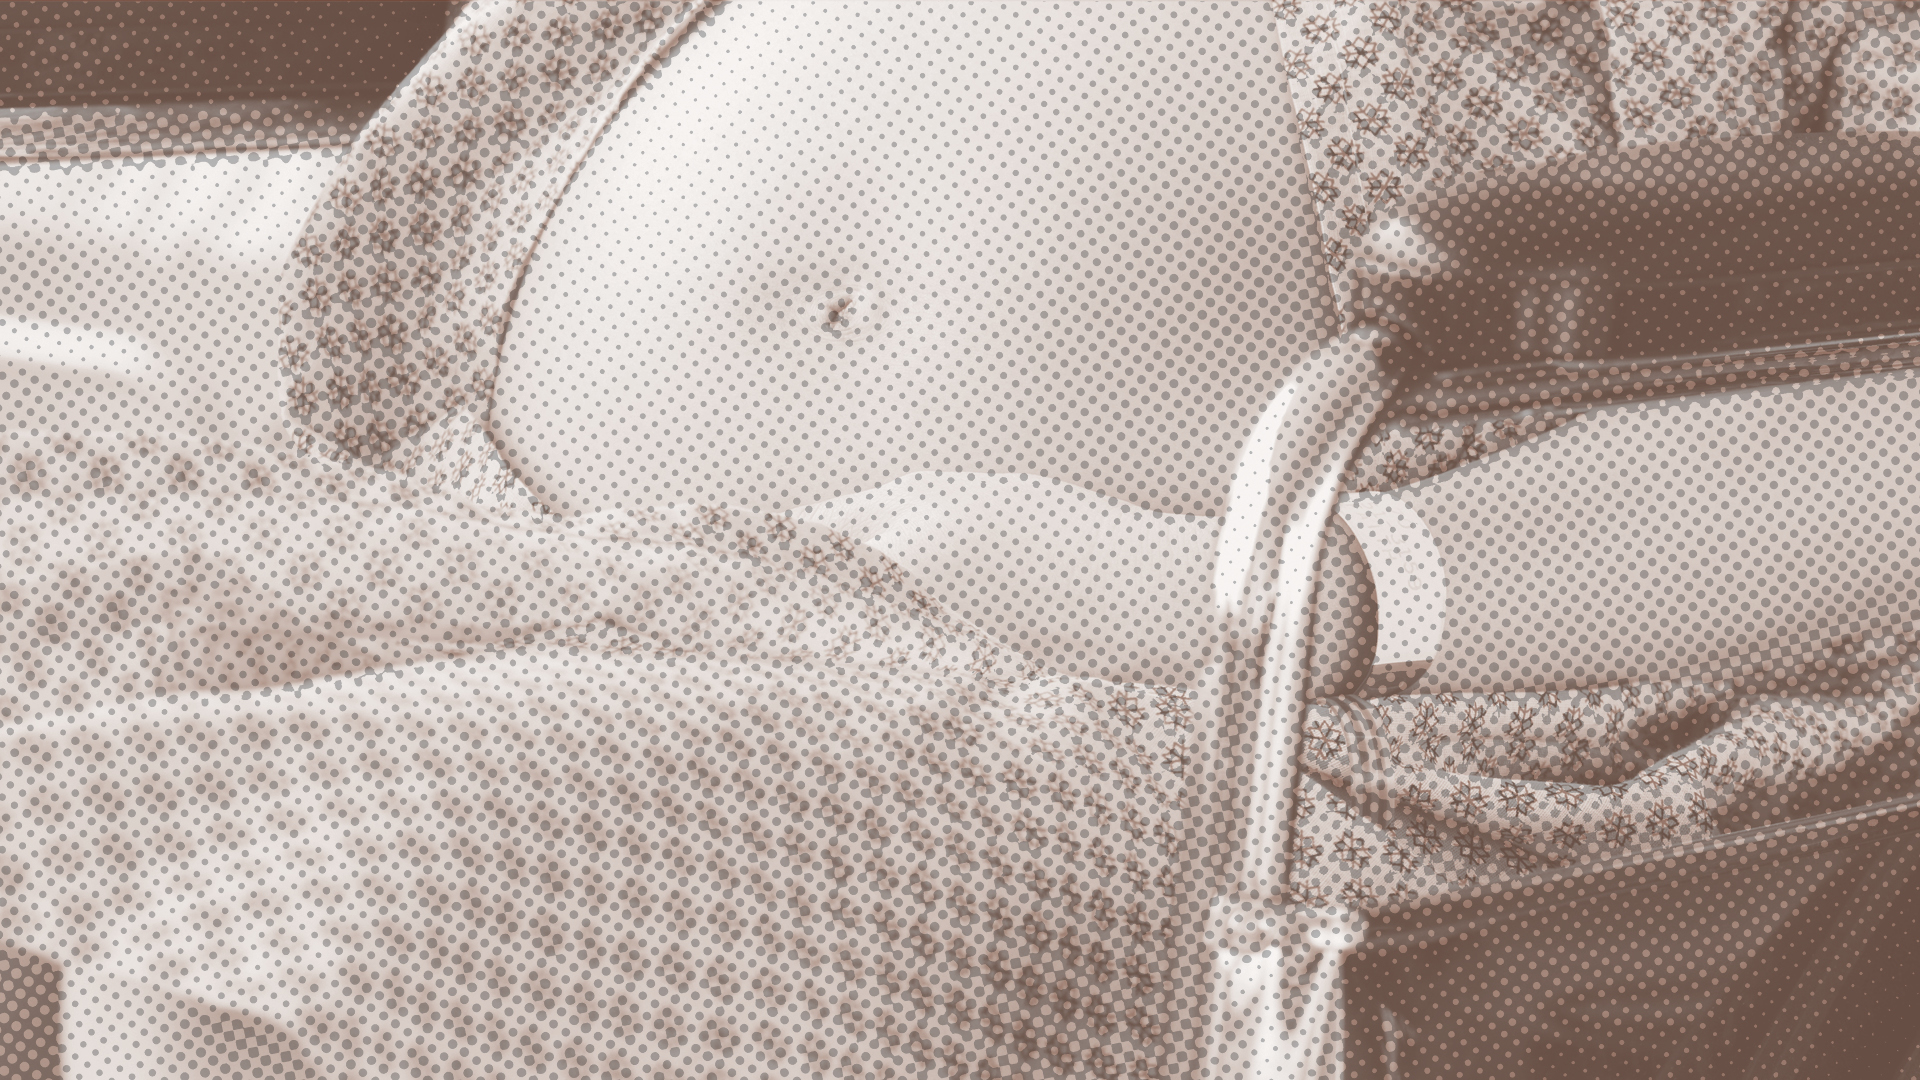 A close-up of a stomach of a pregnant person in a wheelchair, with a brown filter